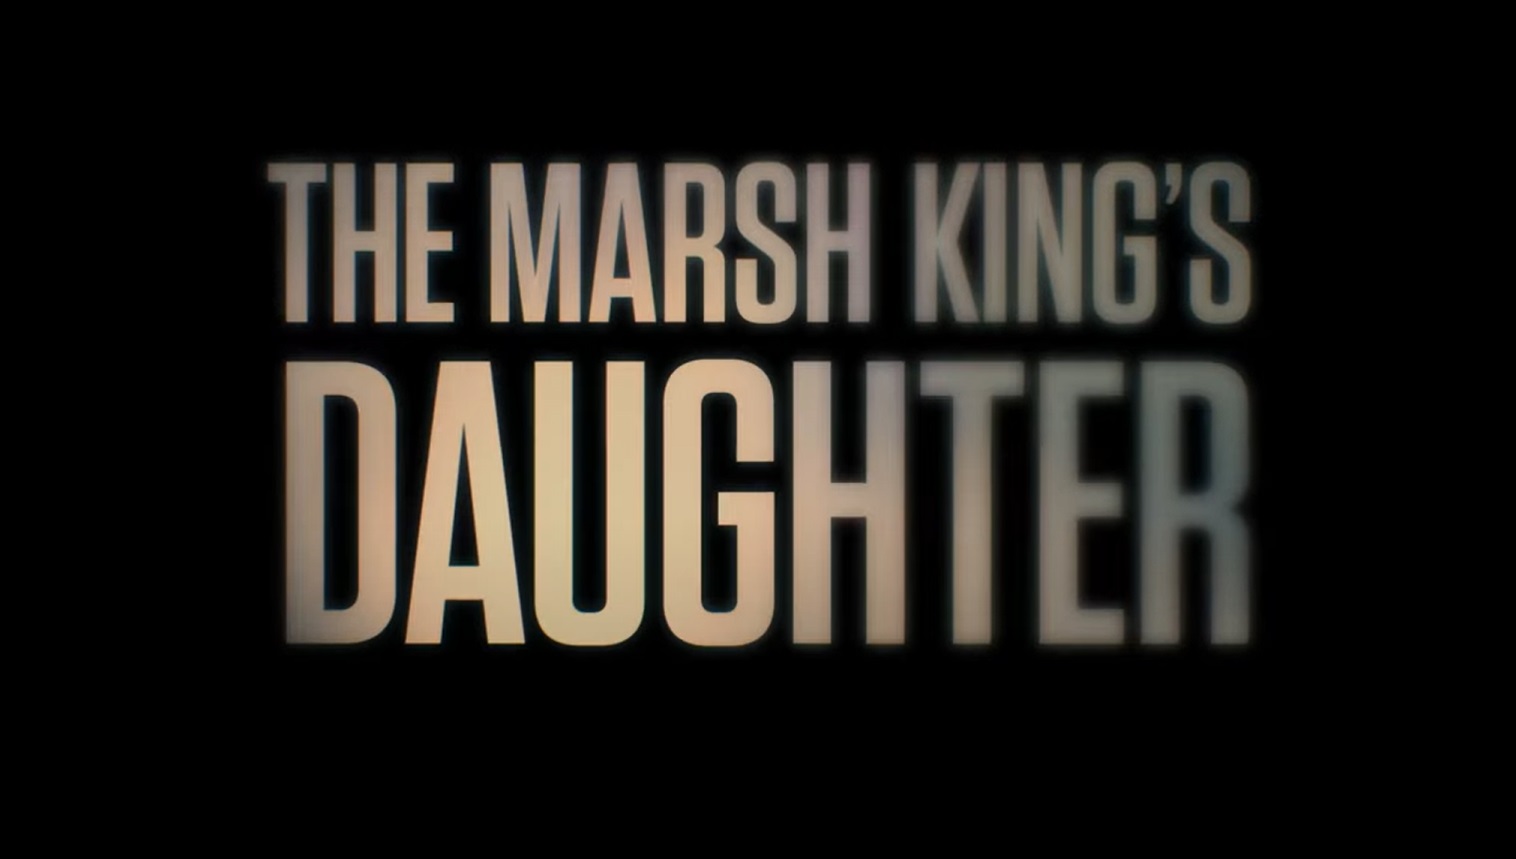 You are currently viewing The Marsh King’s Daughter